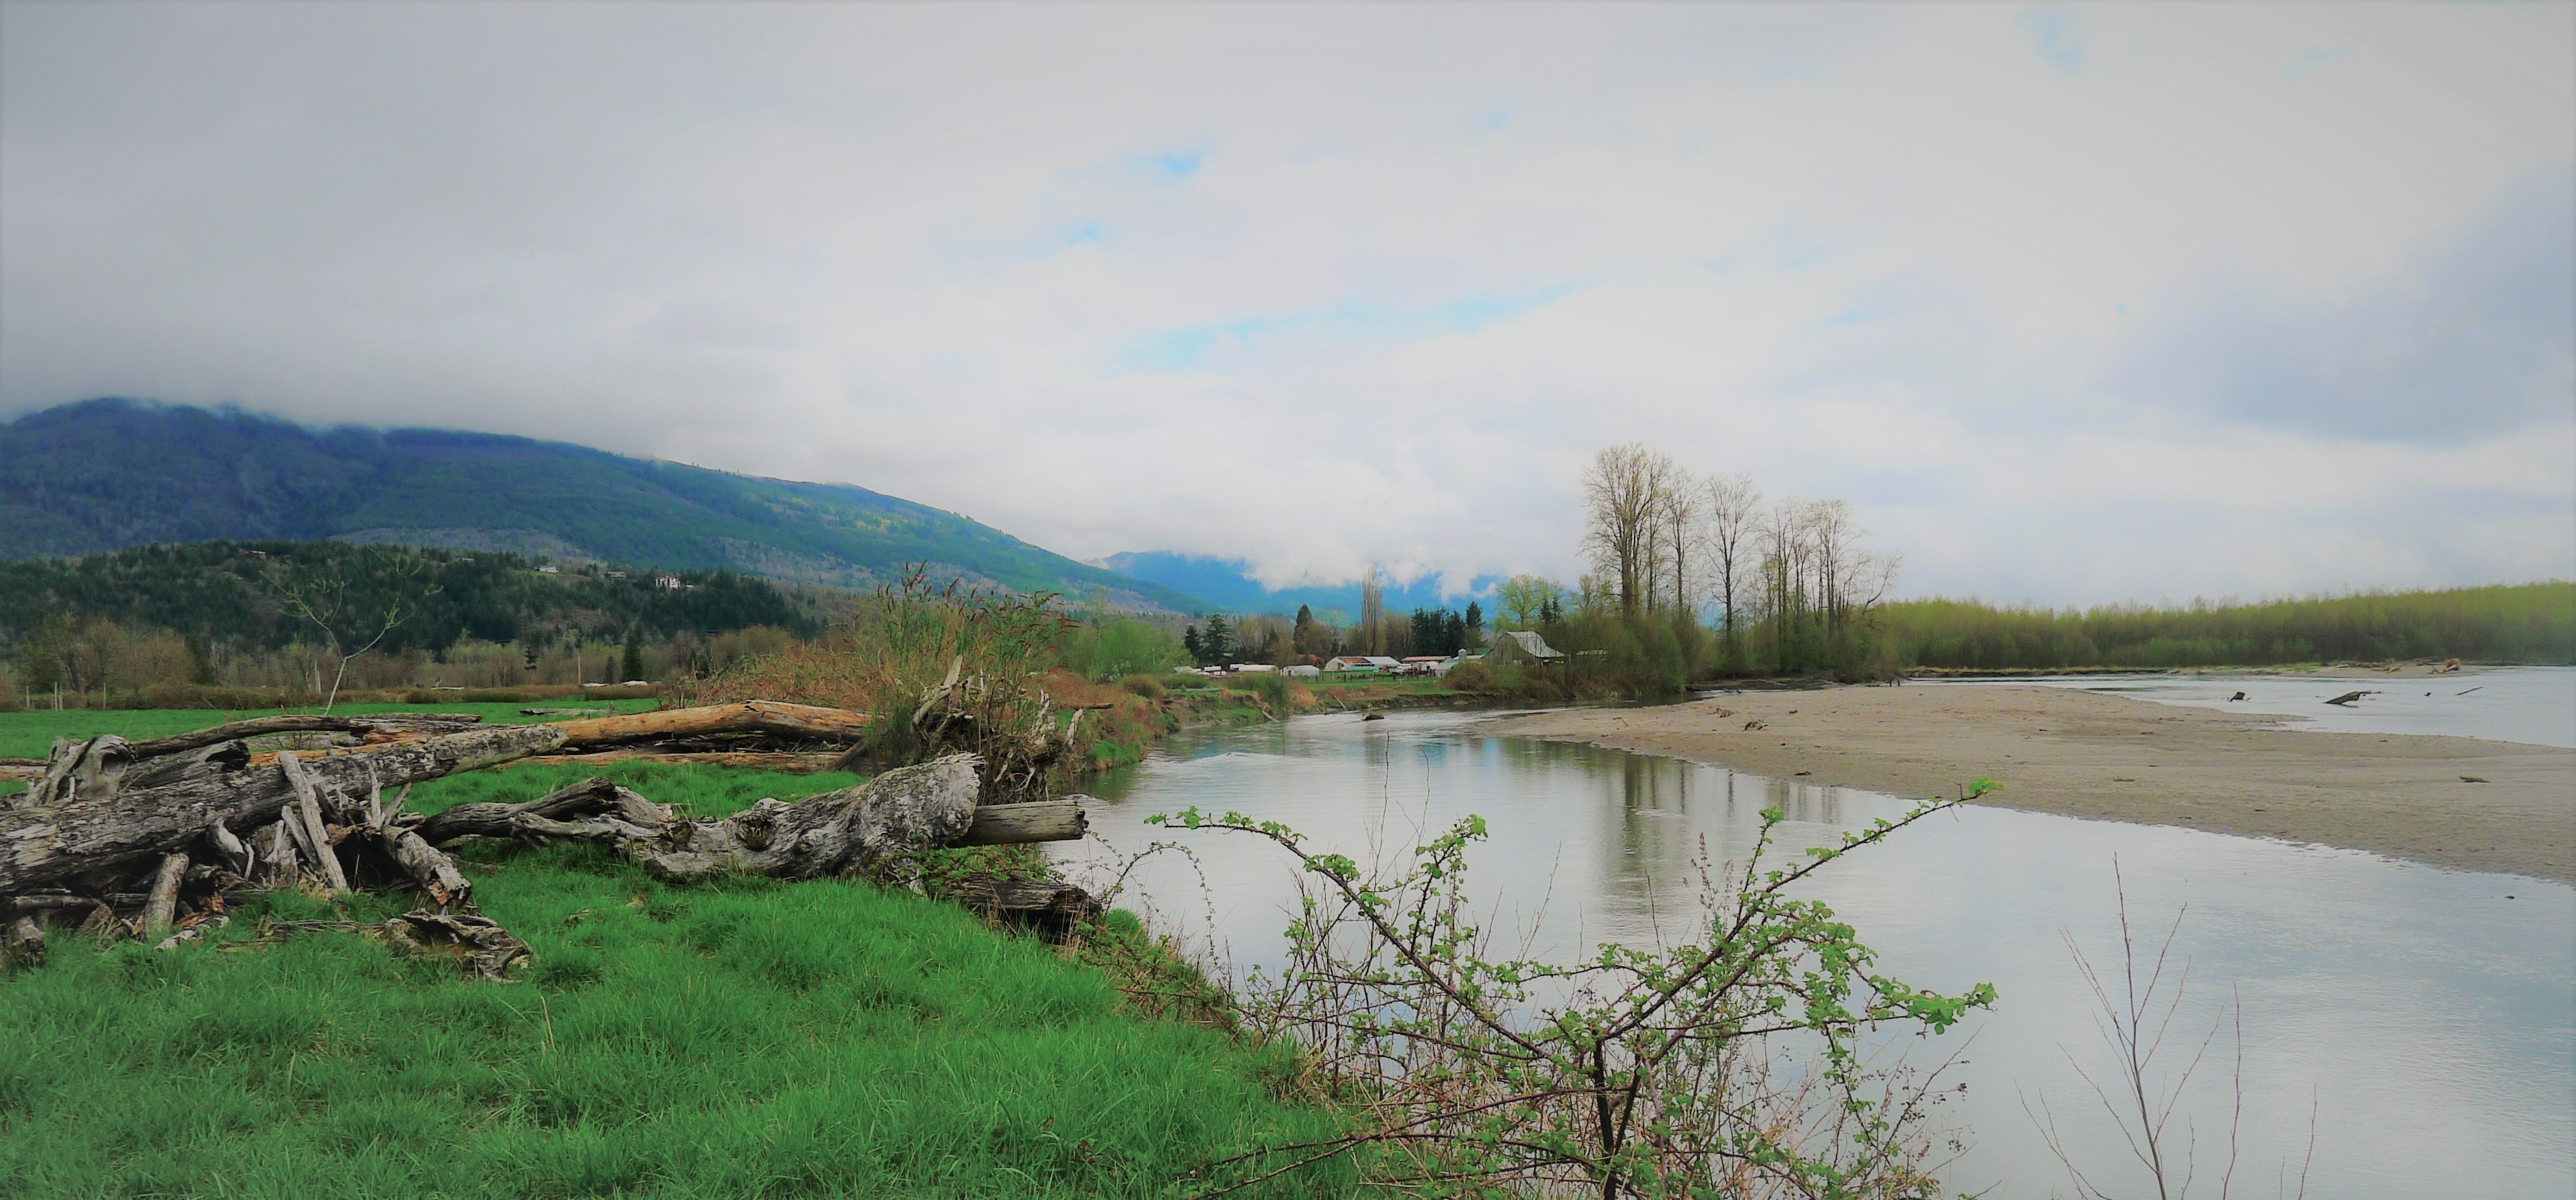 Utopia Conservation Area protects over 87 acres of creeks, wetlands and forested habitat along the Skagit River. Photograph credit: Skagit Land Trust staff.